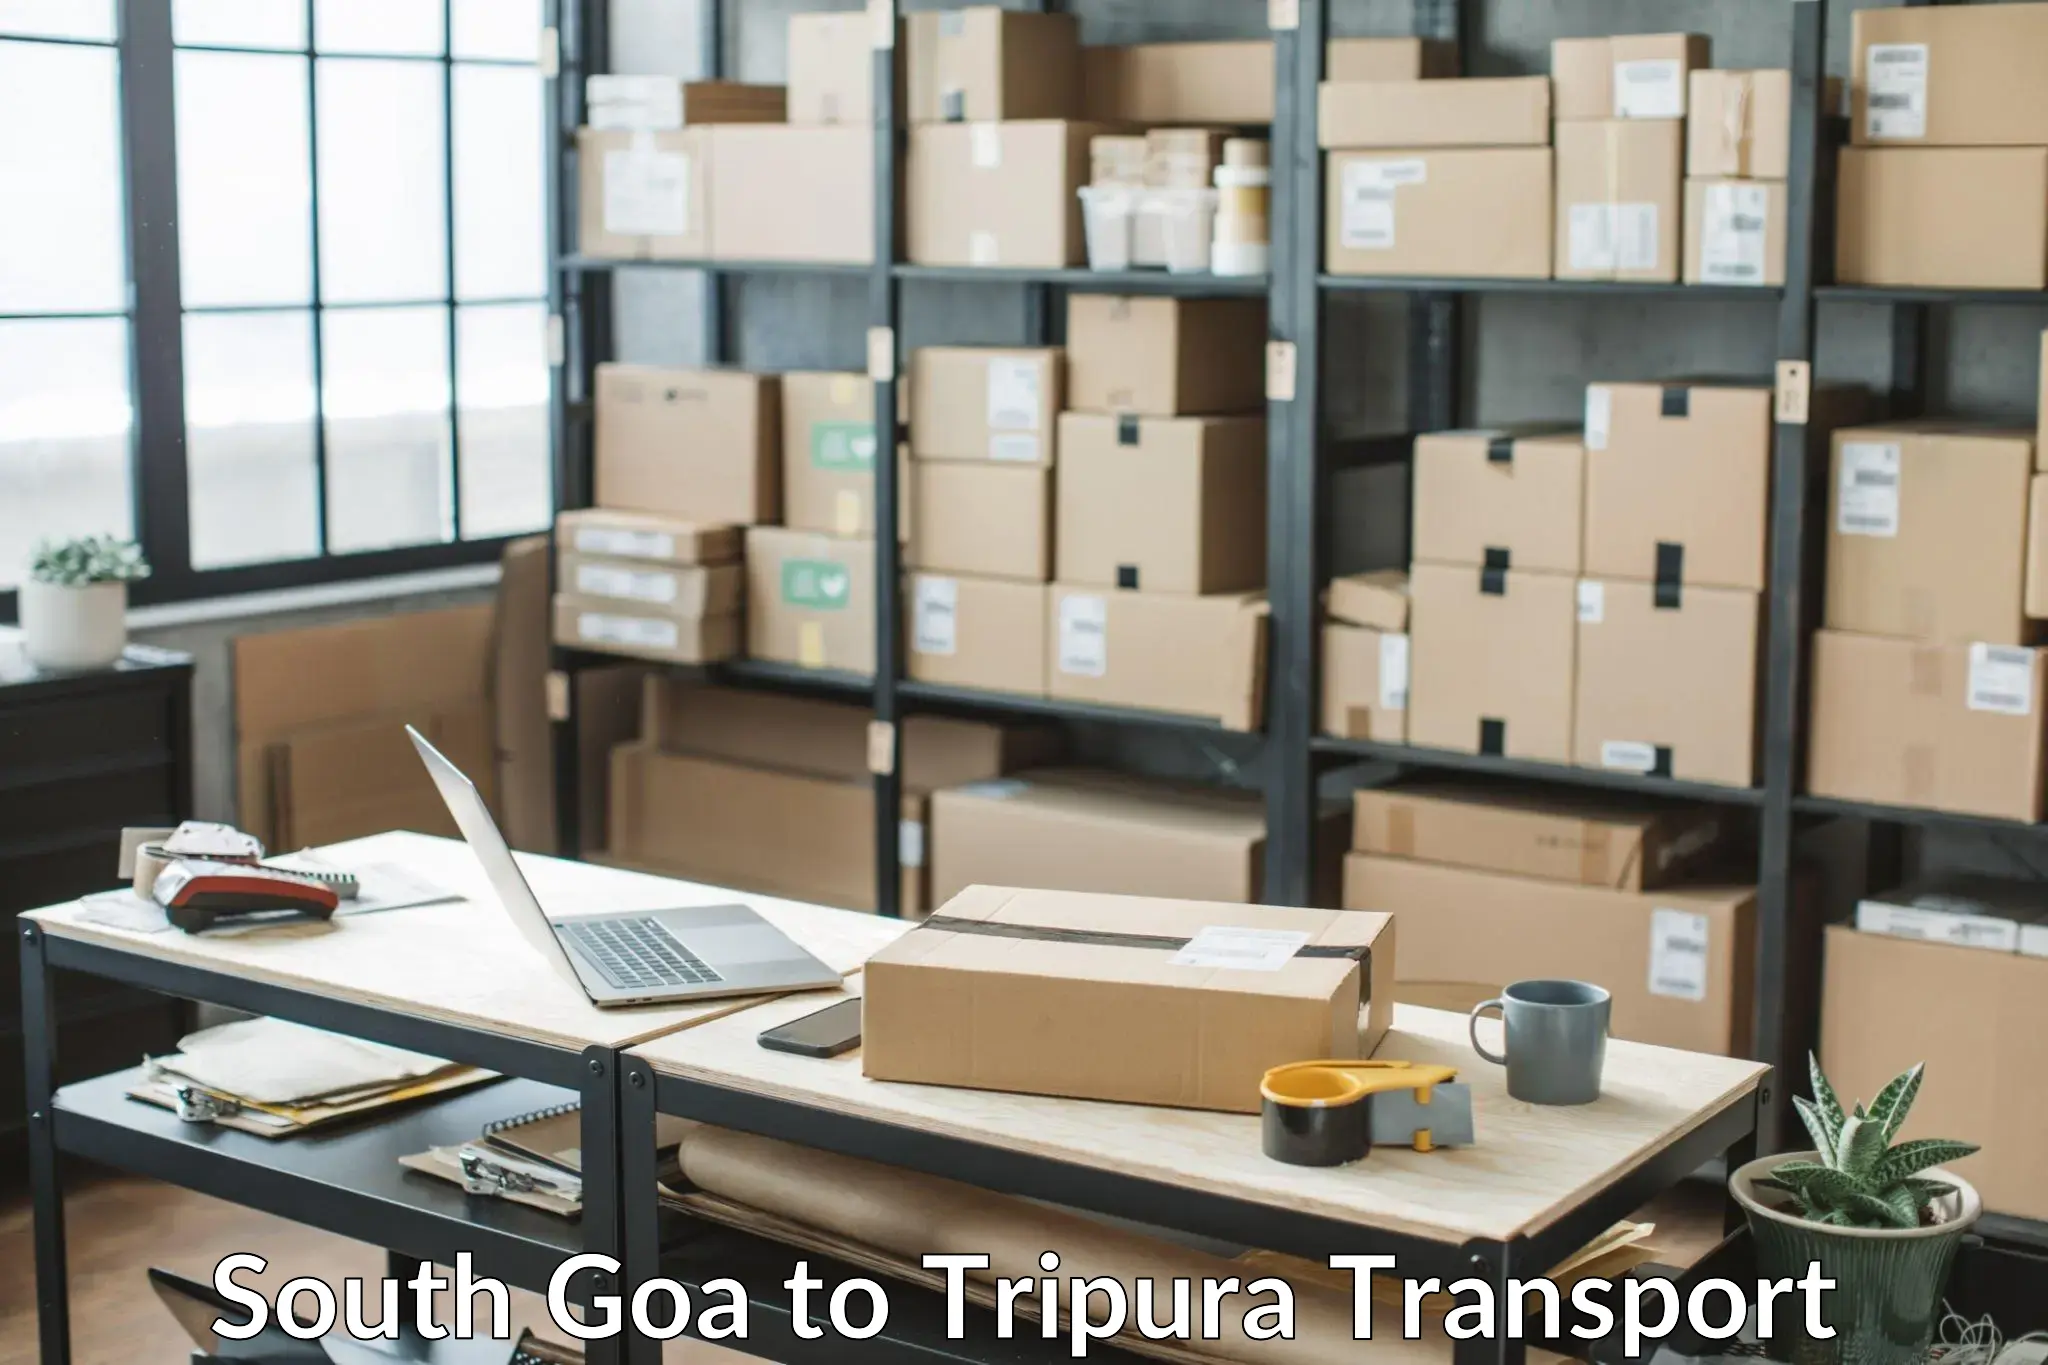 Daily parcel service transport South Goa to Tripura